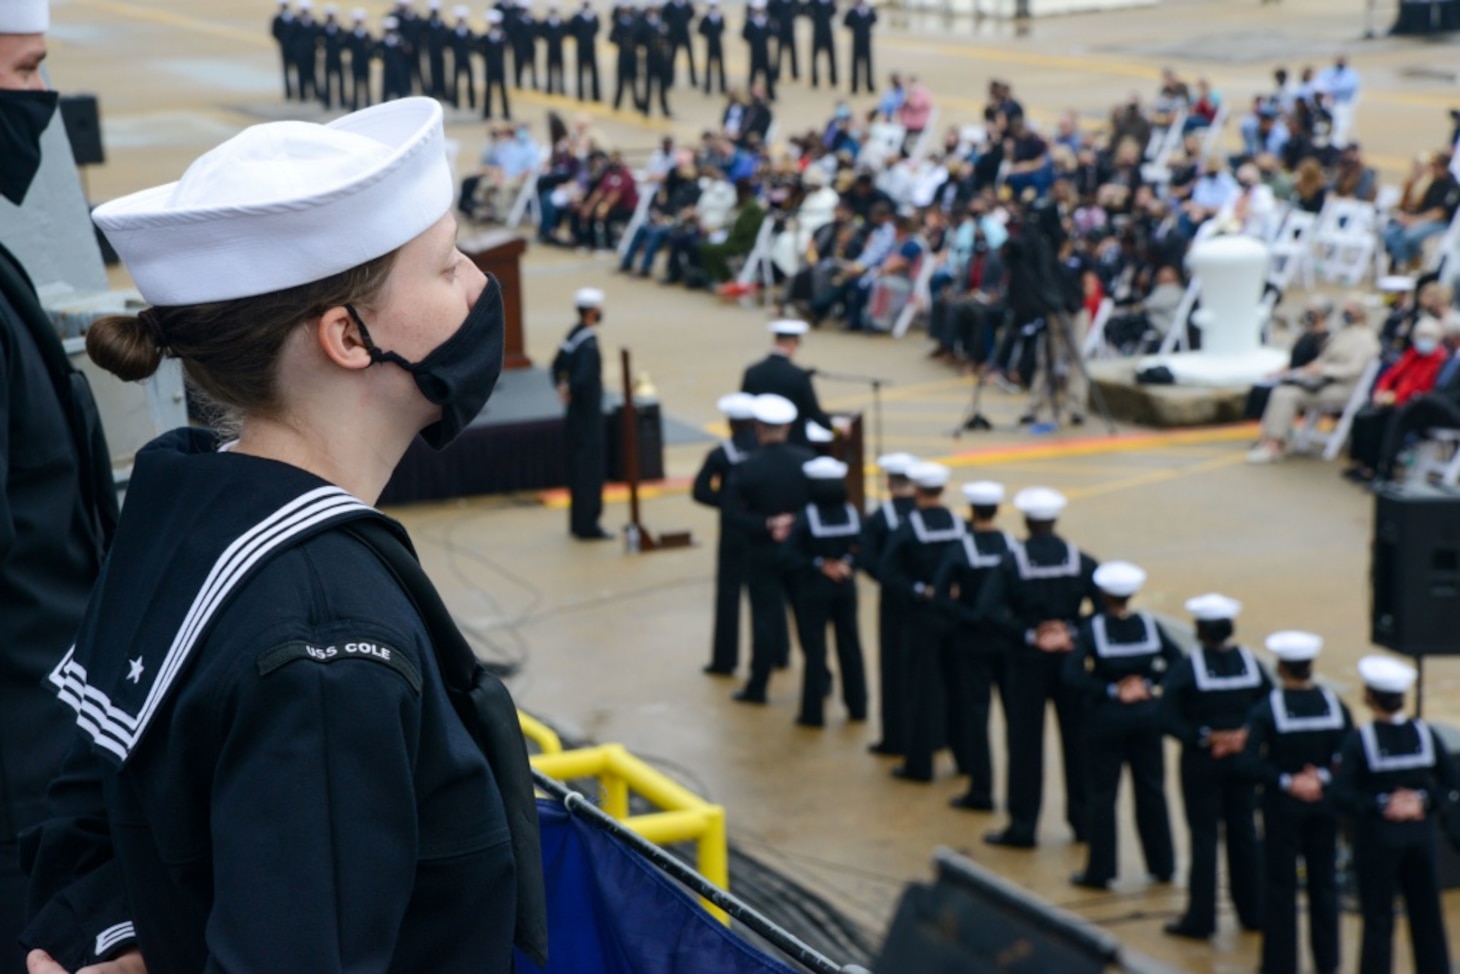 Sailors aboard the Arleigh Burke-class guided missile destroyer USS Cole (DDG 67) stand at parade rest during the 20th Anniversary memorial ceremony onboard Naval Station Norfolk.